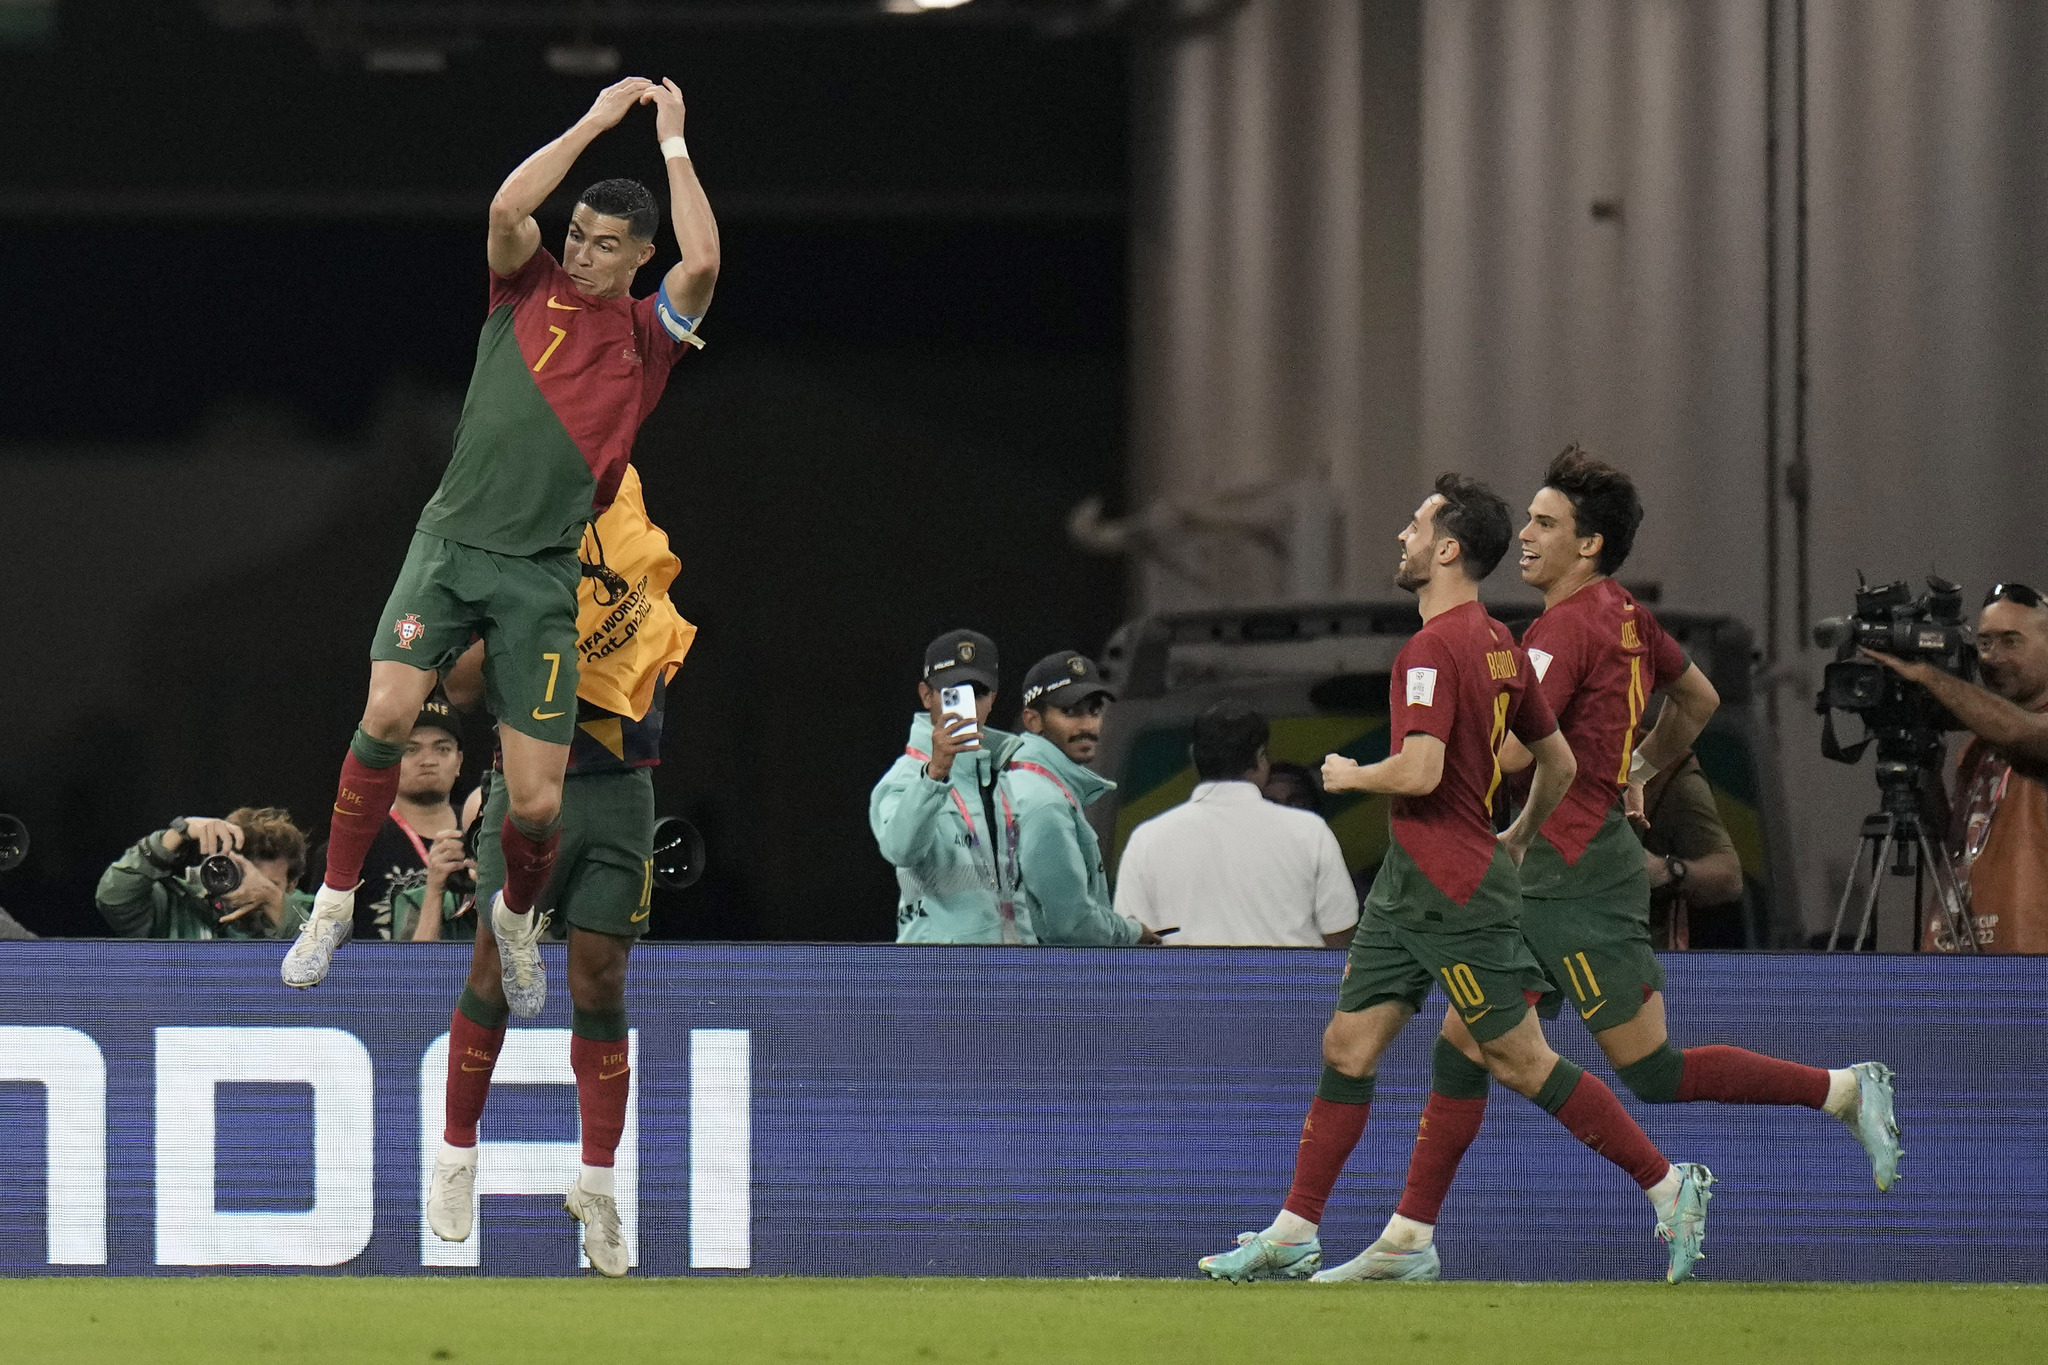  lt;HIT gt;Portugal lt;/HIT gt;'s Cristiano Ronaldo celebrates after scoring his side's first goal during the World Cup group H soccer match between  lt;HIT gt;Portugal lt;/HIT gt; and Ghana, at the Stadium 974 in Doha, Qatar, Thursday, Nov. 24, 2022. (AP Photo/Hassan Ammar)